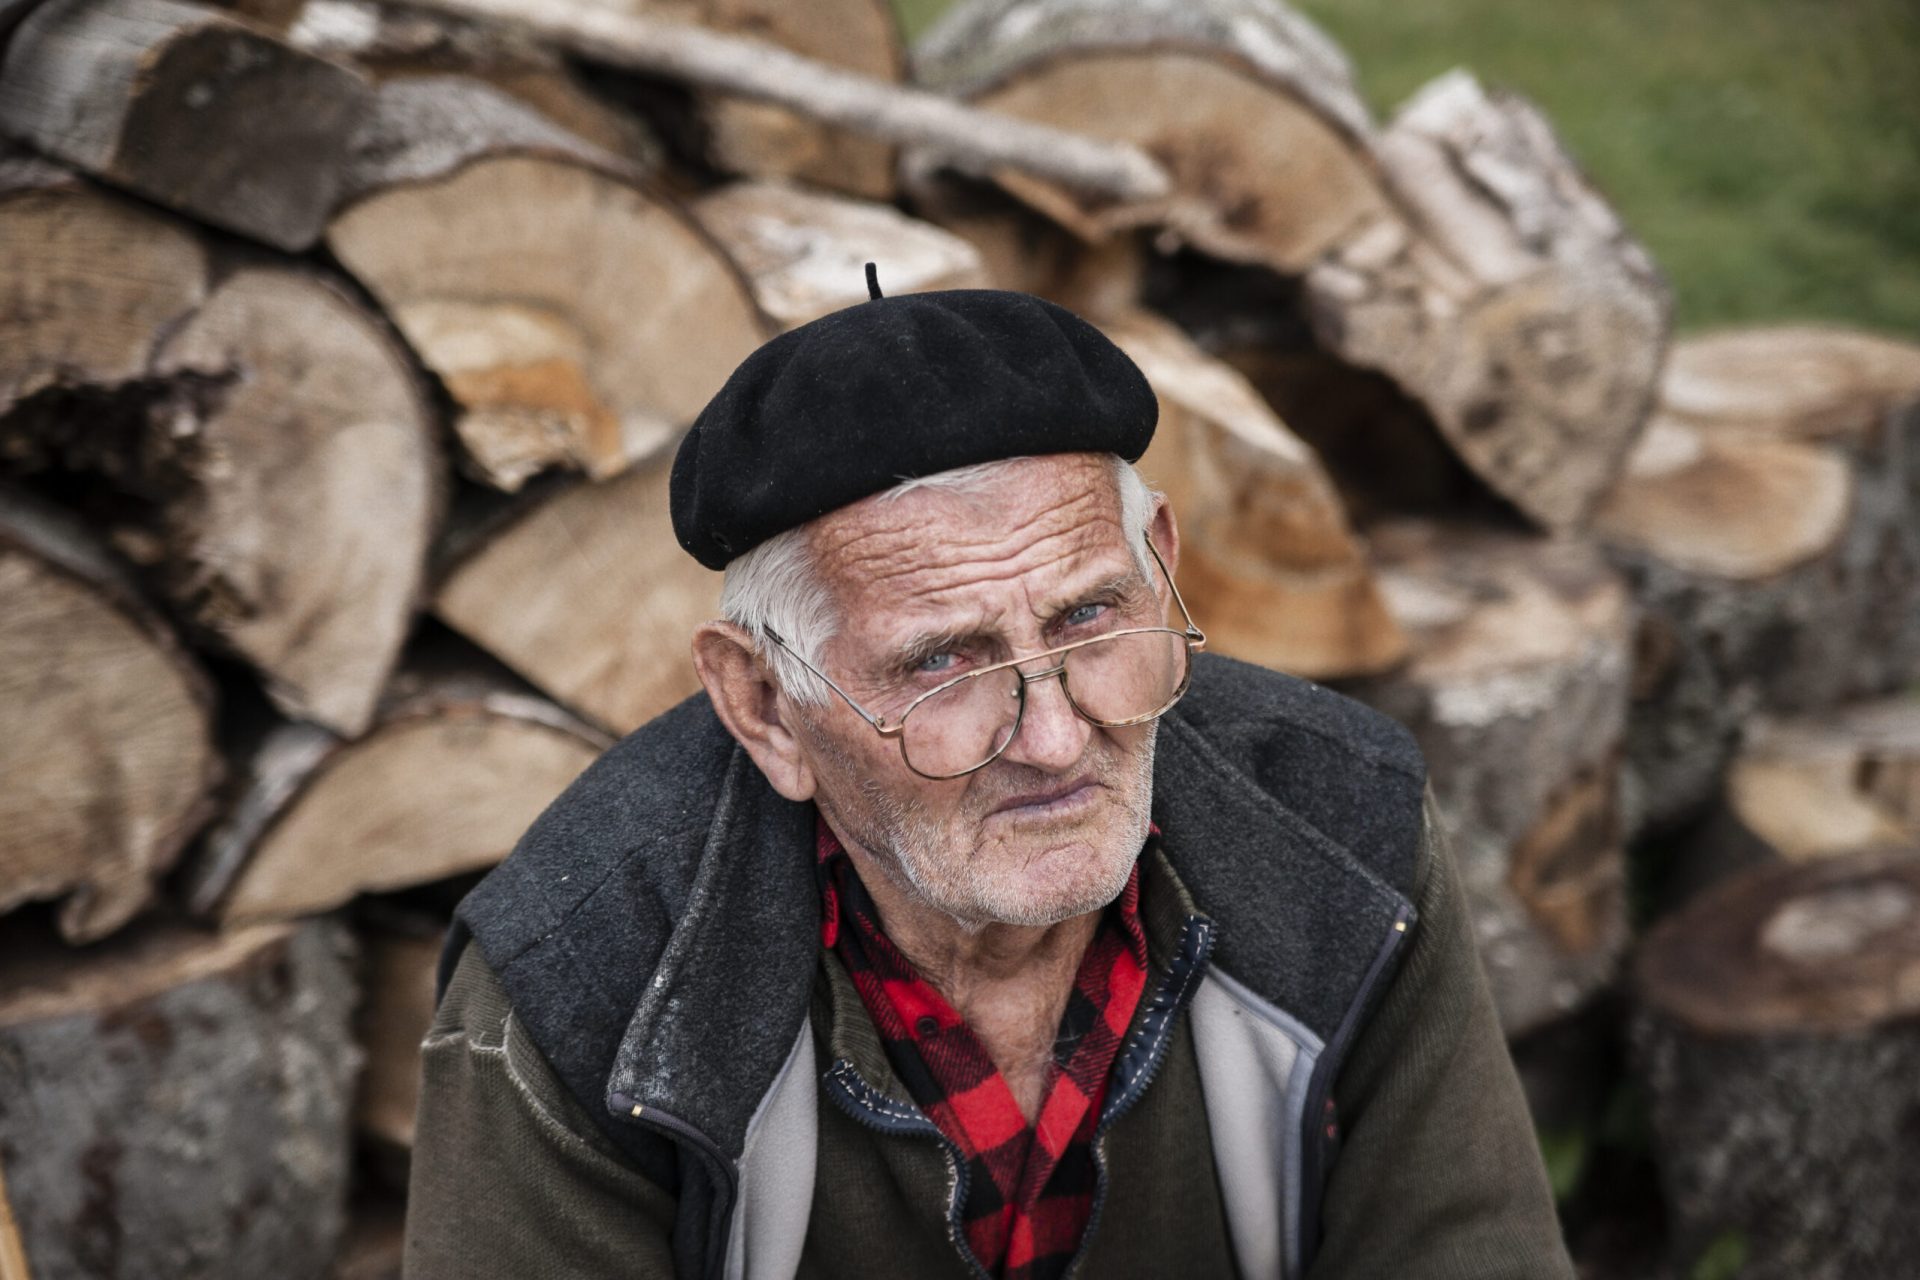 Lukomir, Bosnia and Herzegovina - July 14, 2013: Portrait of an old man sitting in front of a pile of fire wood in Lukomir. Lukomir, Bosnia and Herzegovina, July 14, 2013